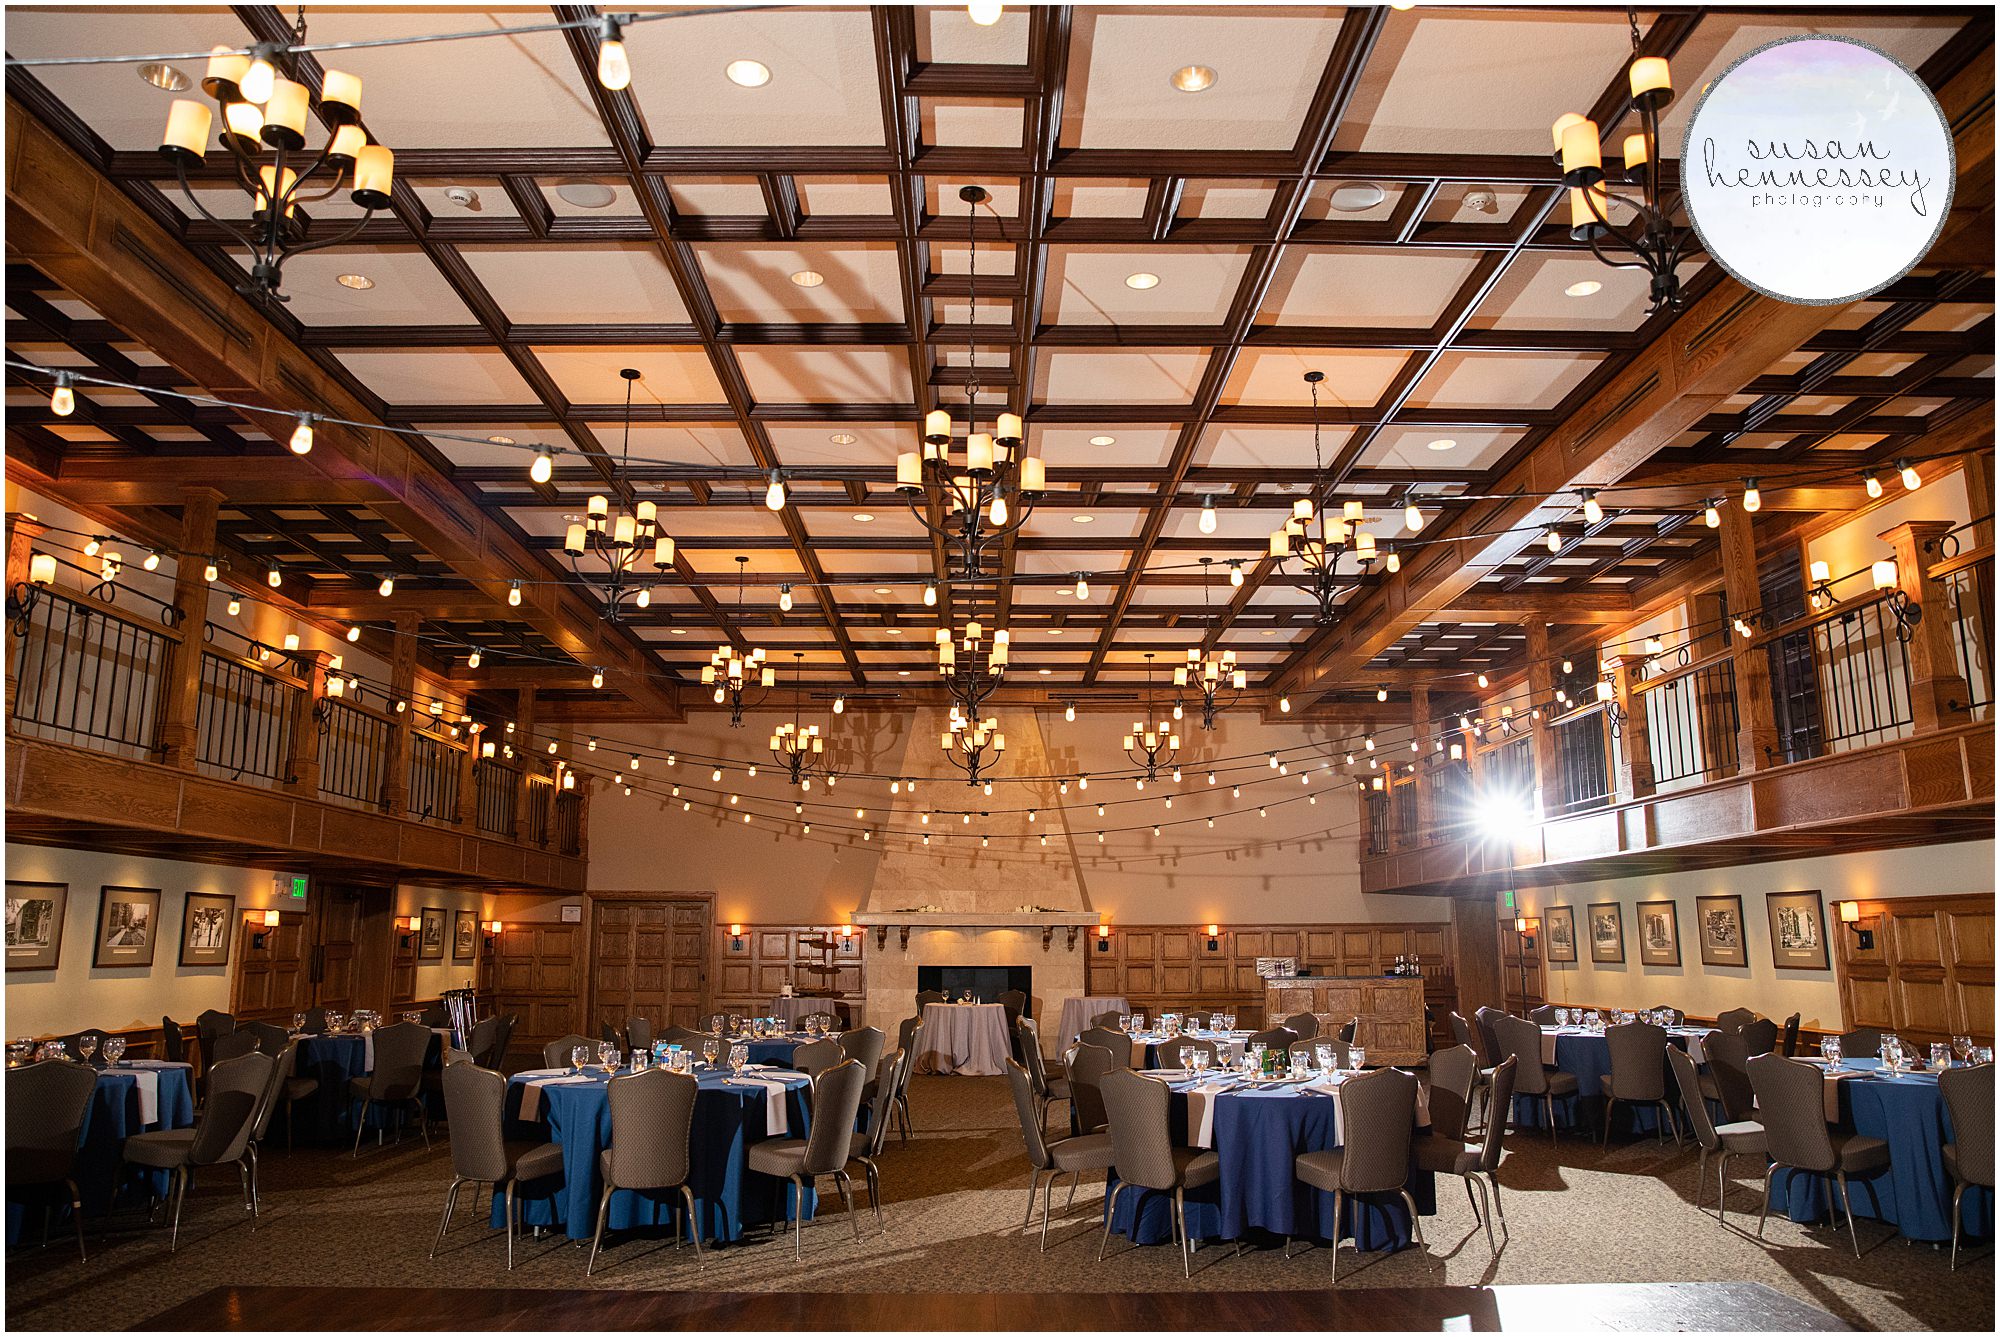 The Ballroom at the Moorestown Community House in Moorestown, NJ